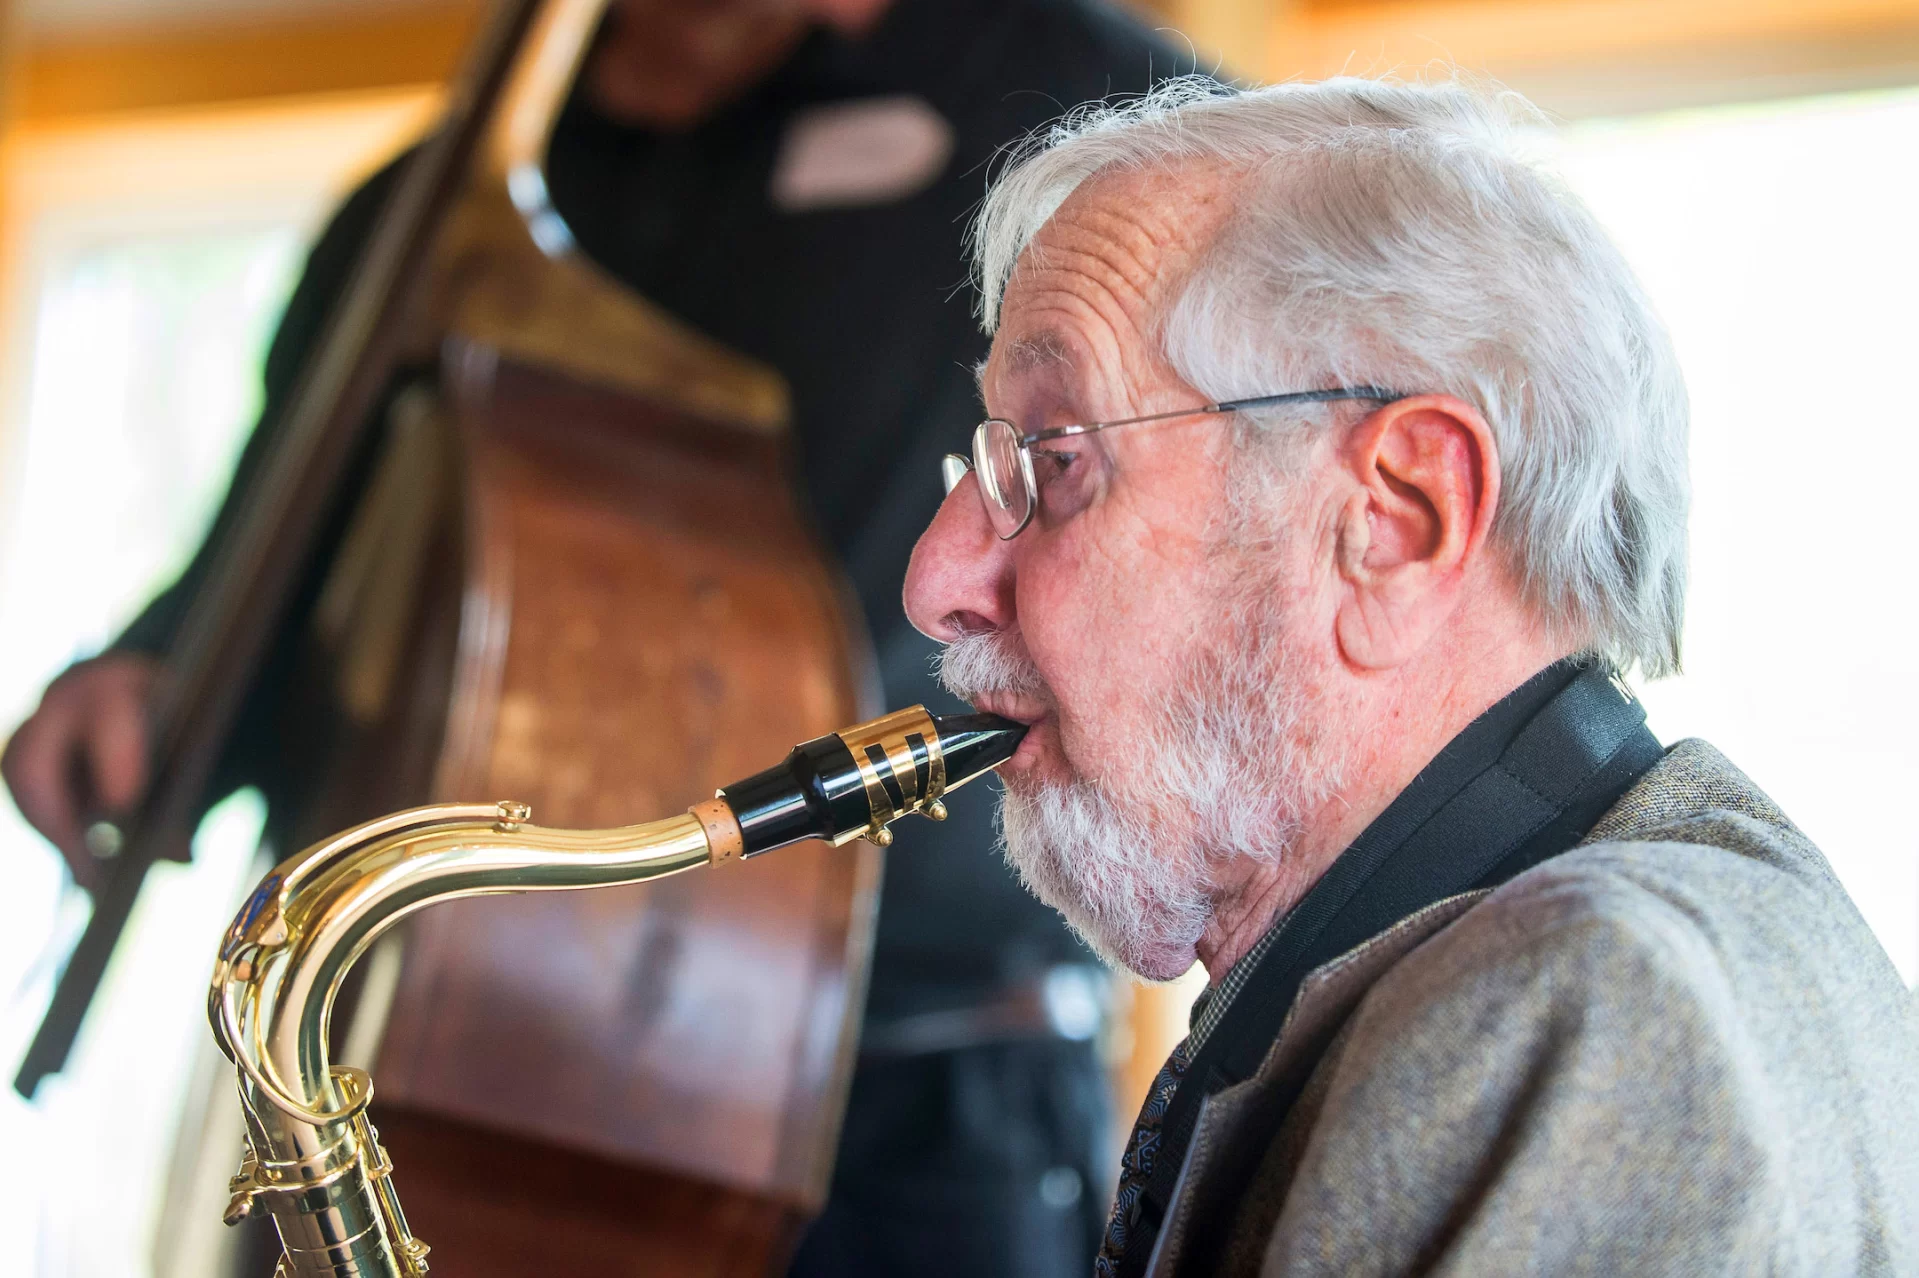 Lou Scolnik '45 is still blowing his horn, joined by Physics professor John Smedley on guitar and area bassist Tim Clough on bass.

Surviving members of the Bates V12 Naval program have their annual meeting on Friday October 2 2015 in the Benjamin Mays Center.